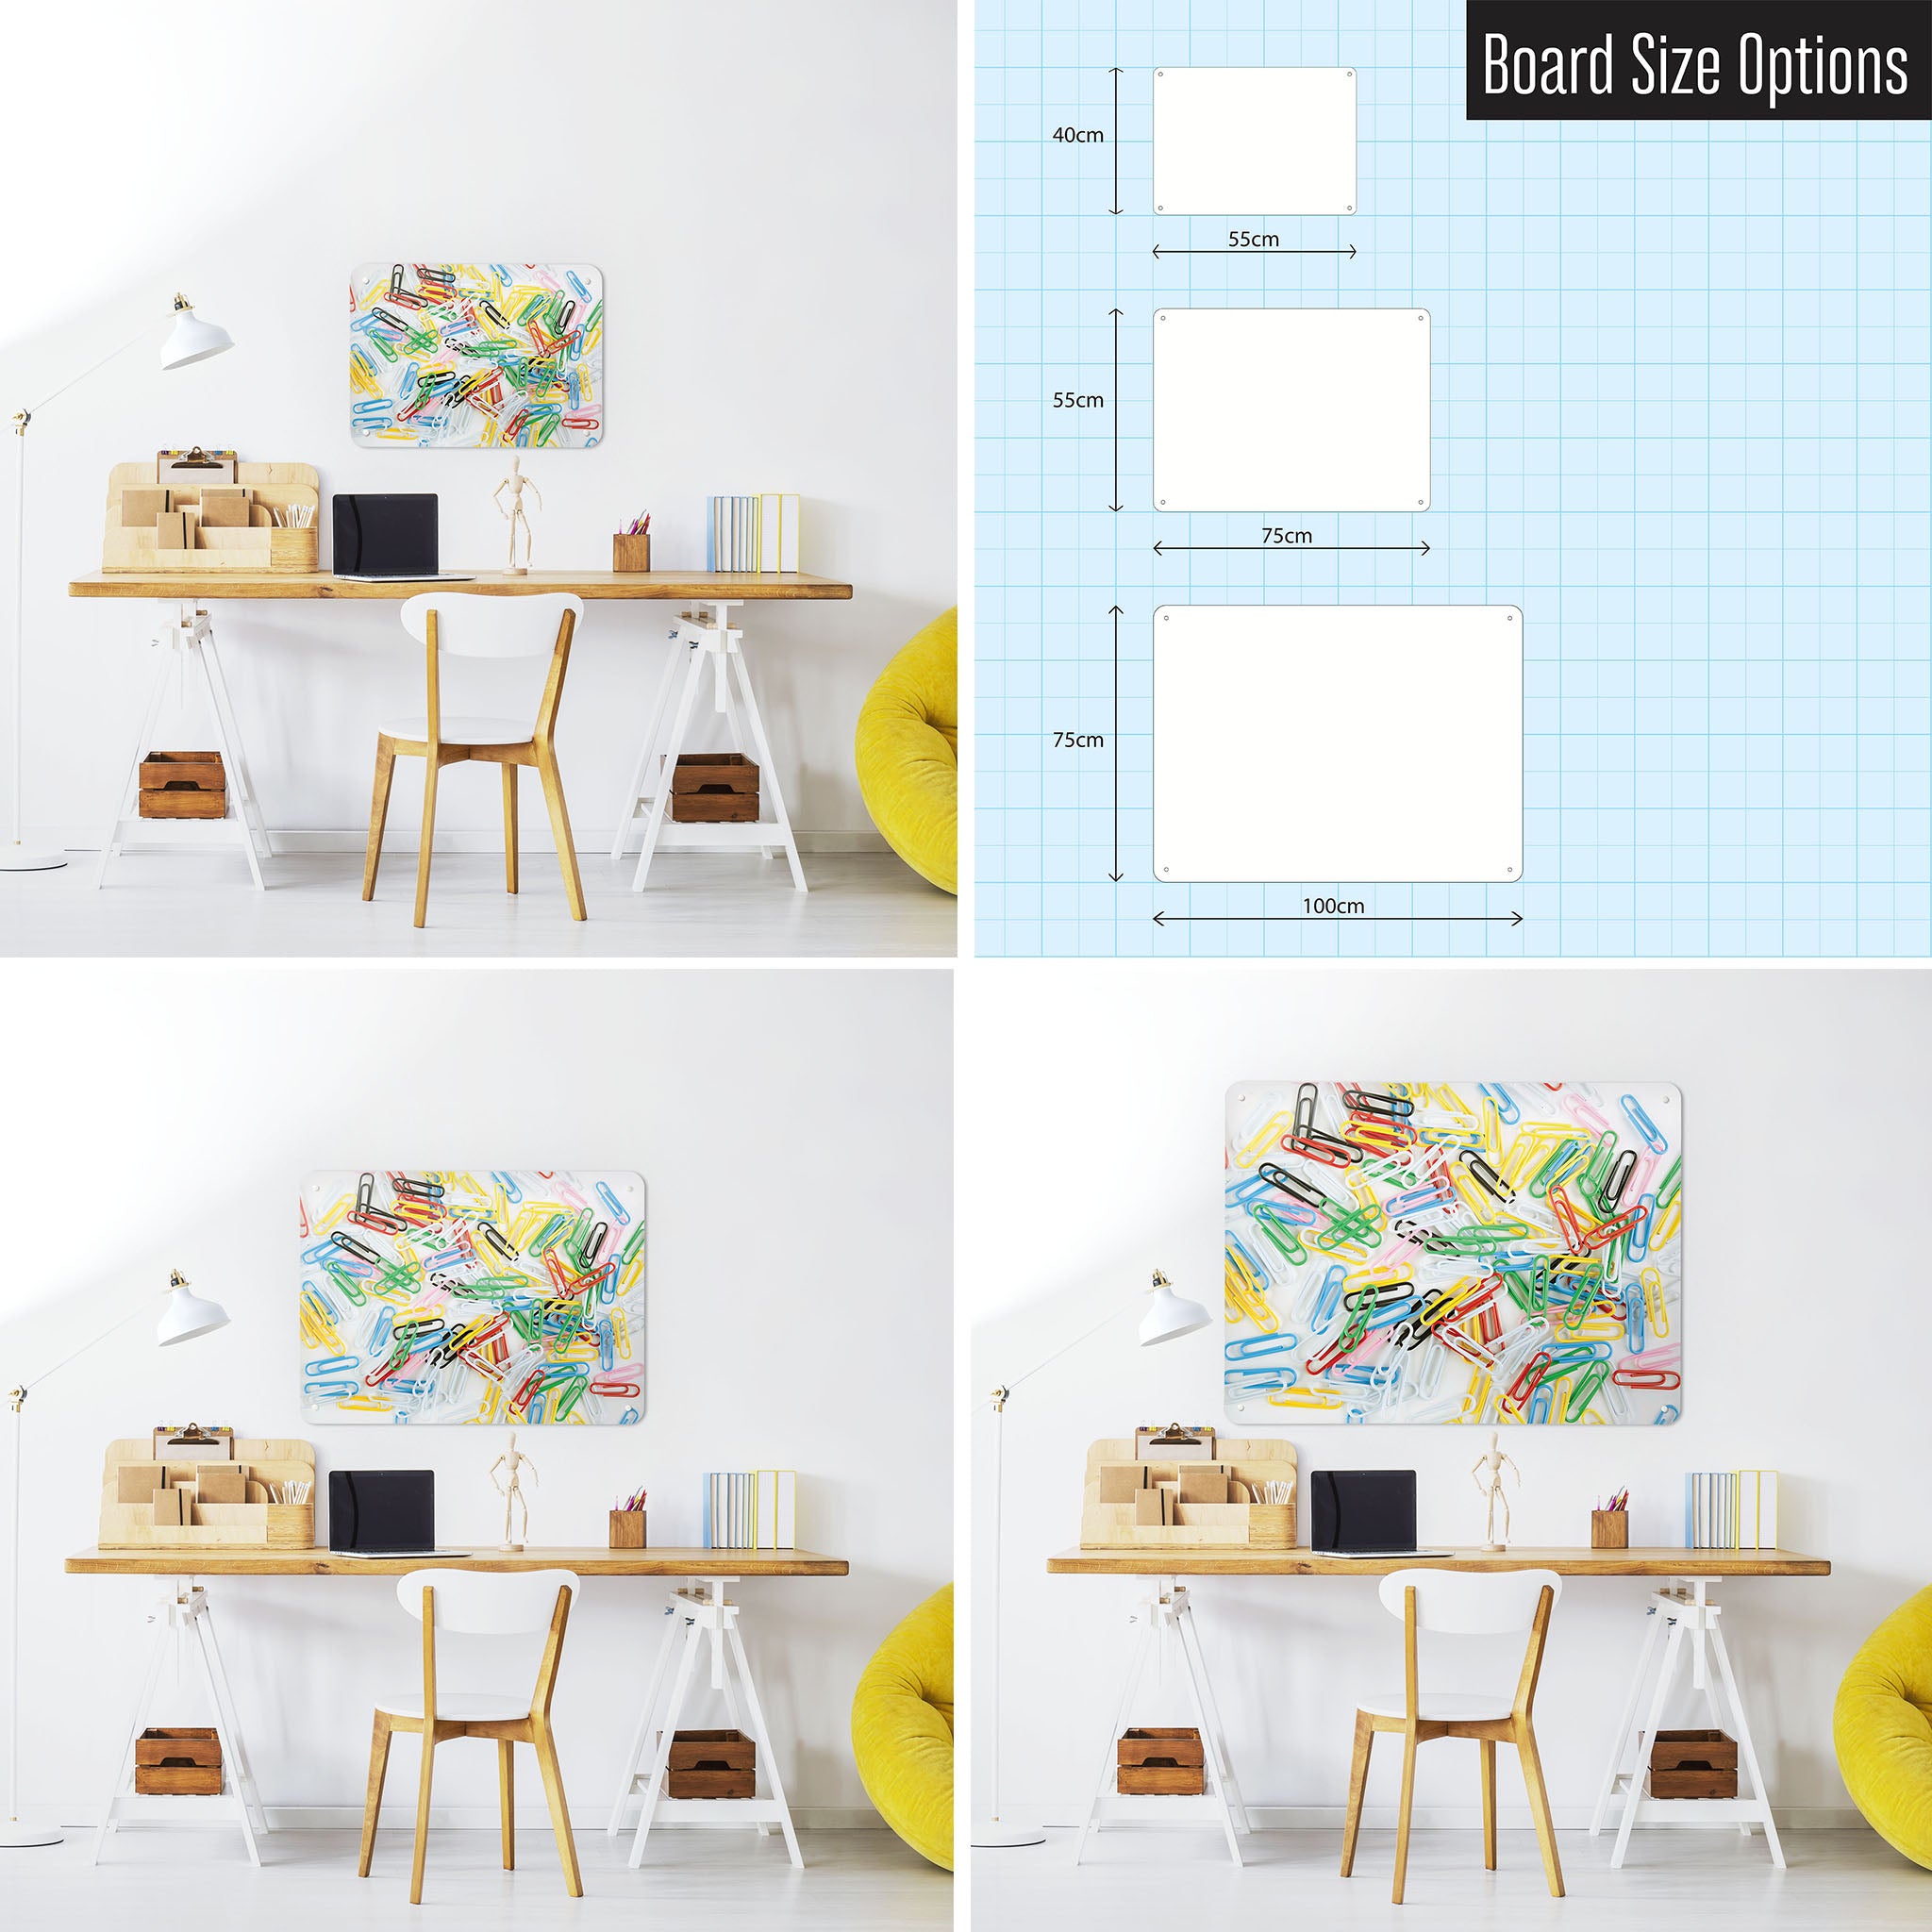 Three photographs of a workspace interior and a diagram to show size comparisons of a paper clips photographic magnetic notice board